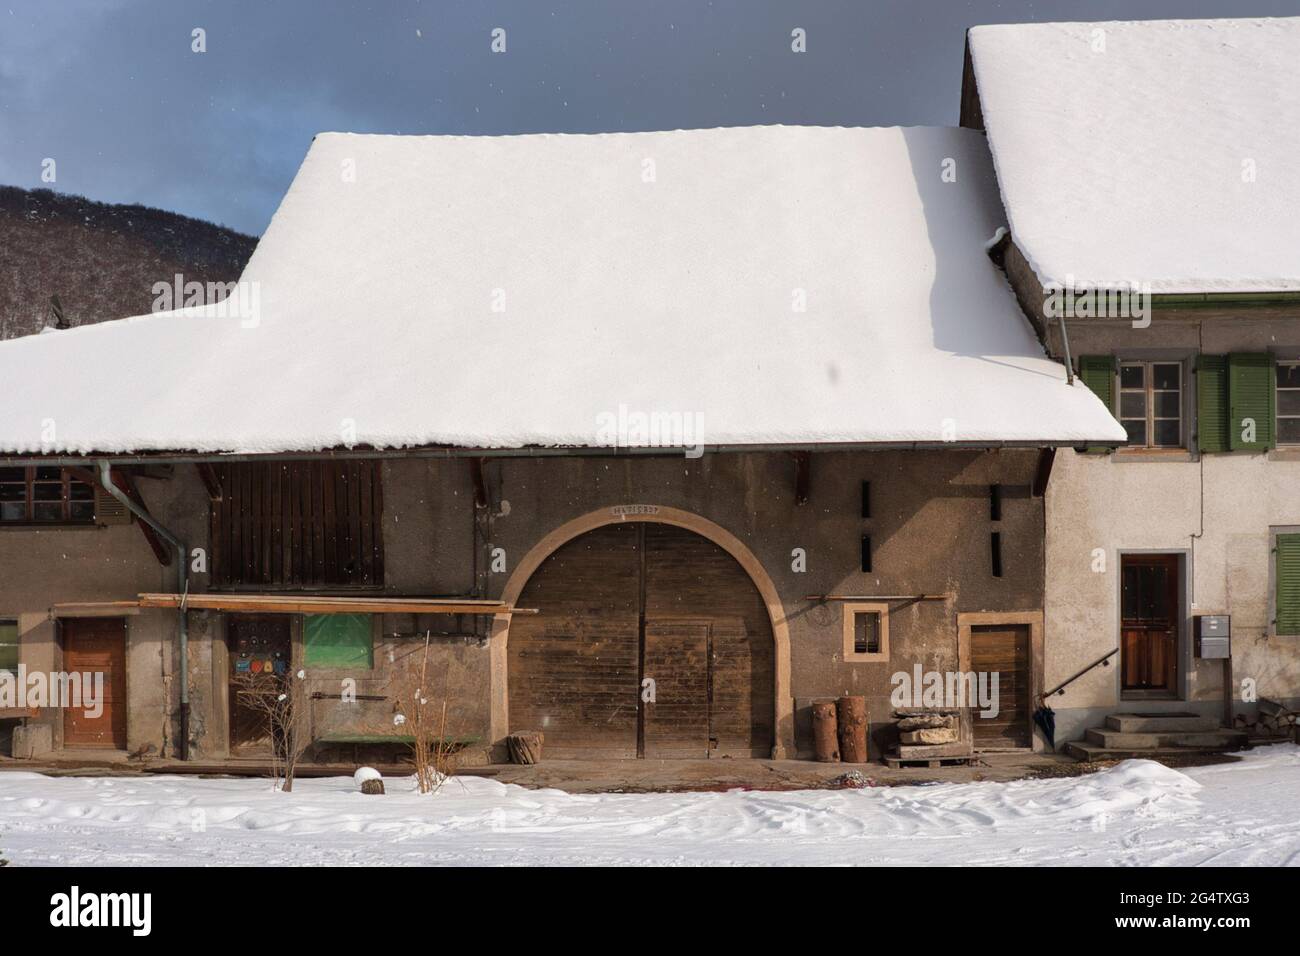 An old barn with large arched doorway and snow covered roof in the village of Oberdorf, Switzerland Stock Photo